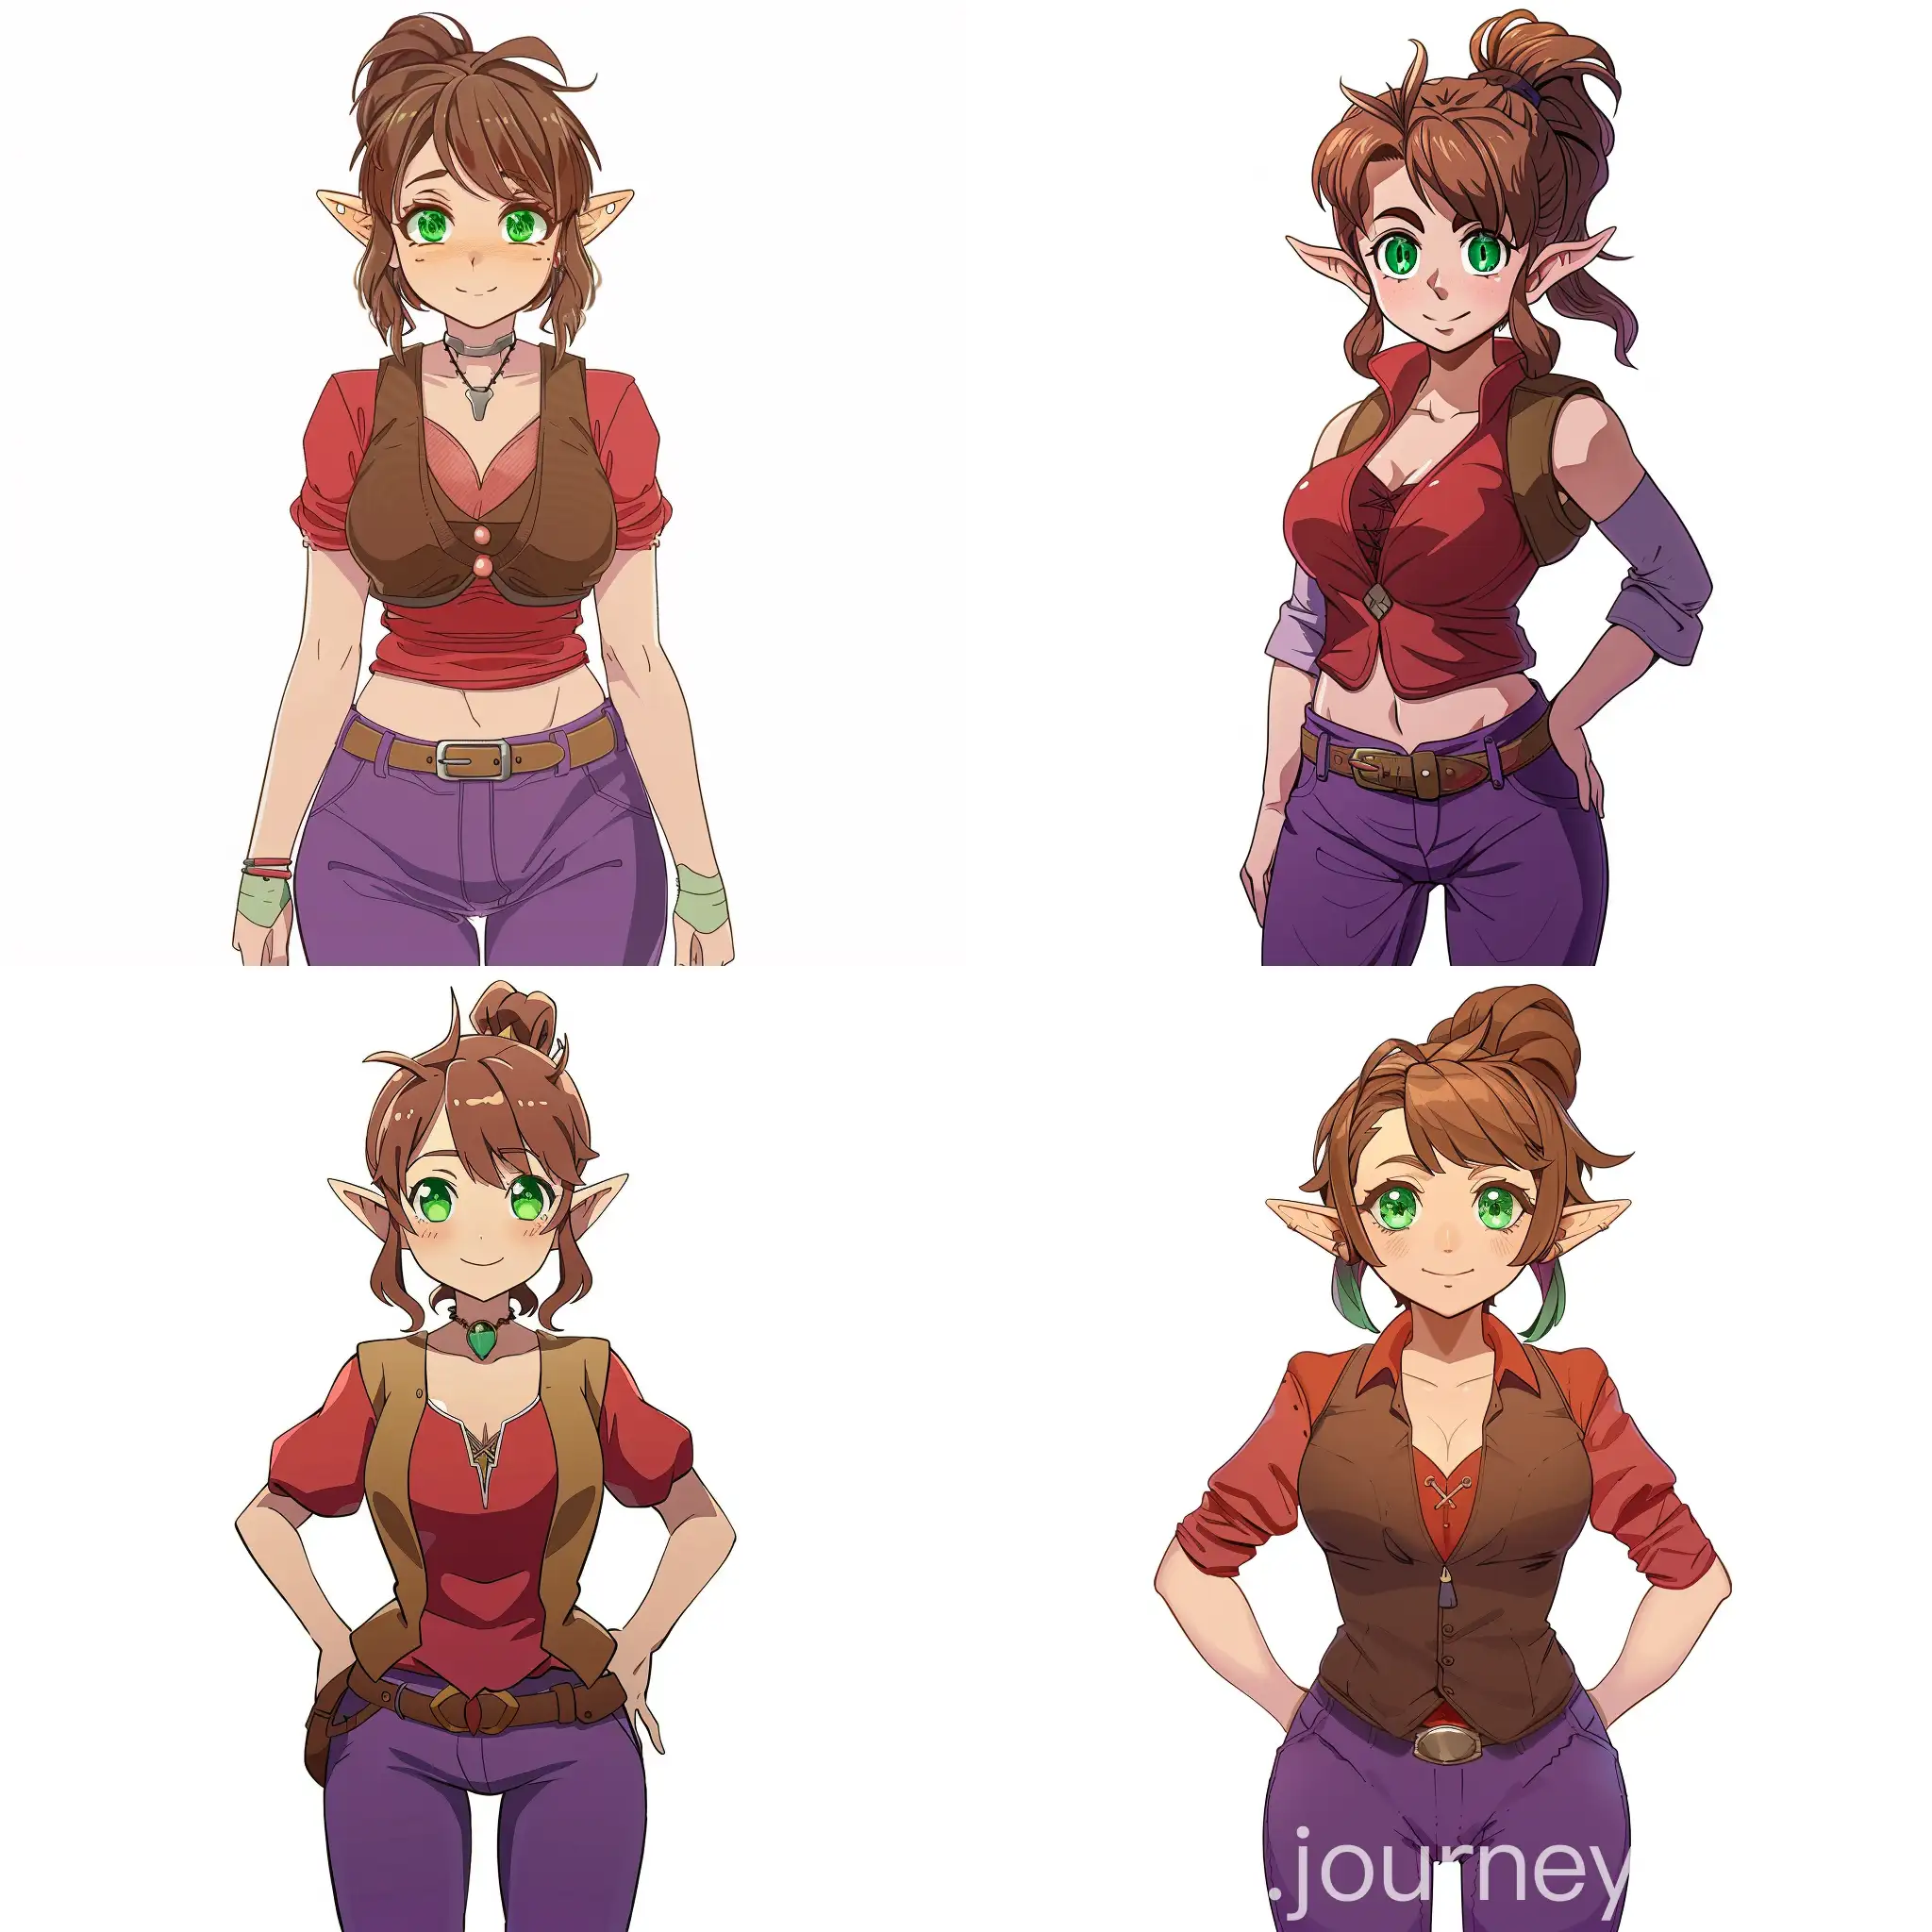 Anime-Style-Elf-with-Brown-Hair-and-Green-Eyes-in-Red-Shirt-and-Purple-Pants